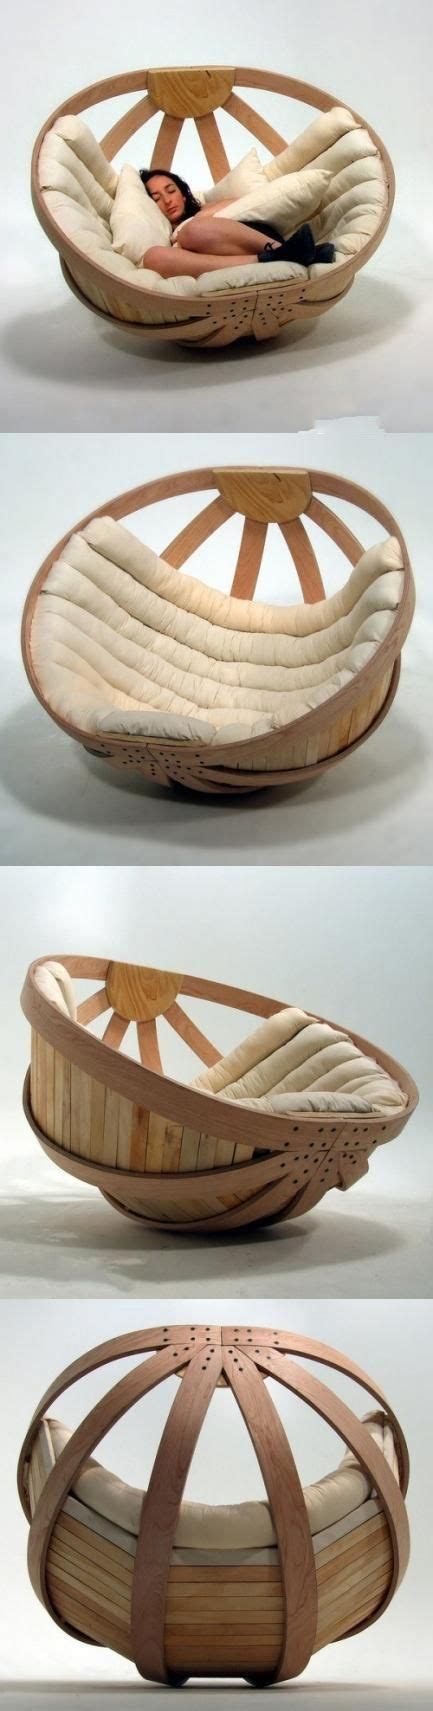 Top Creative Works Cradle For Adults Cool Furniture